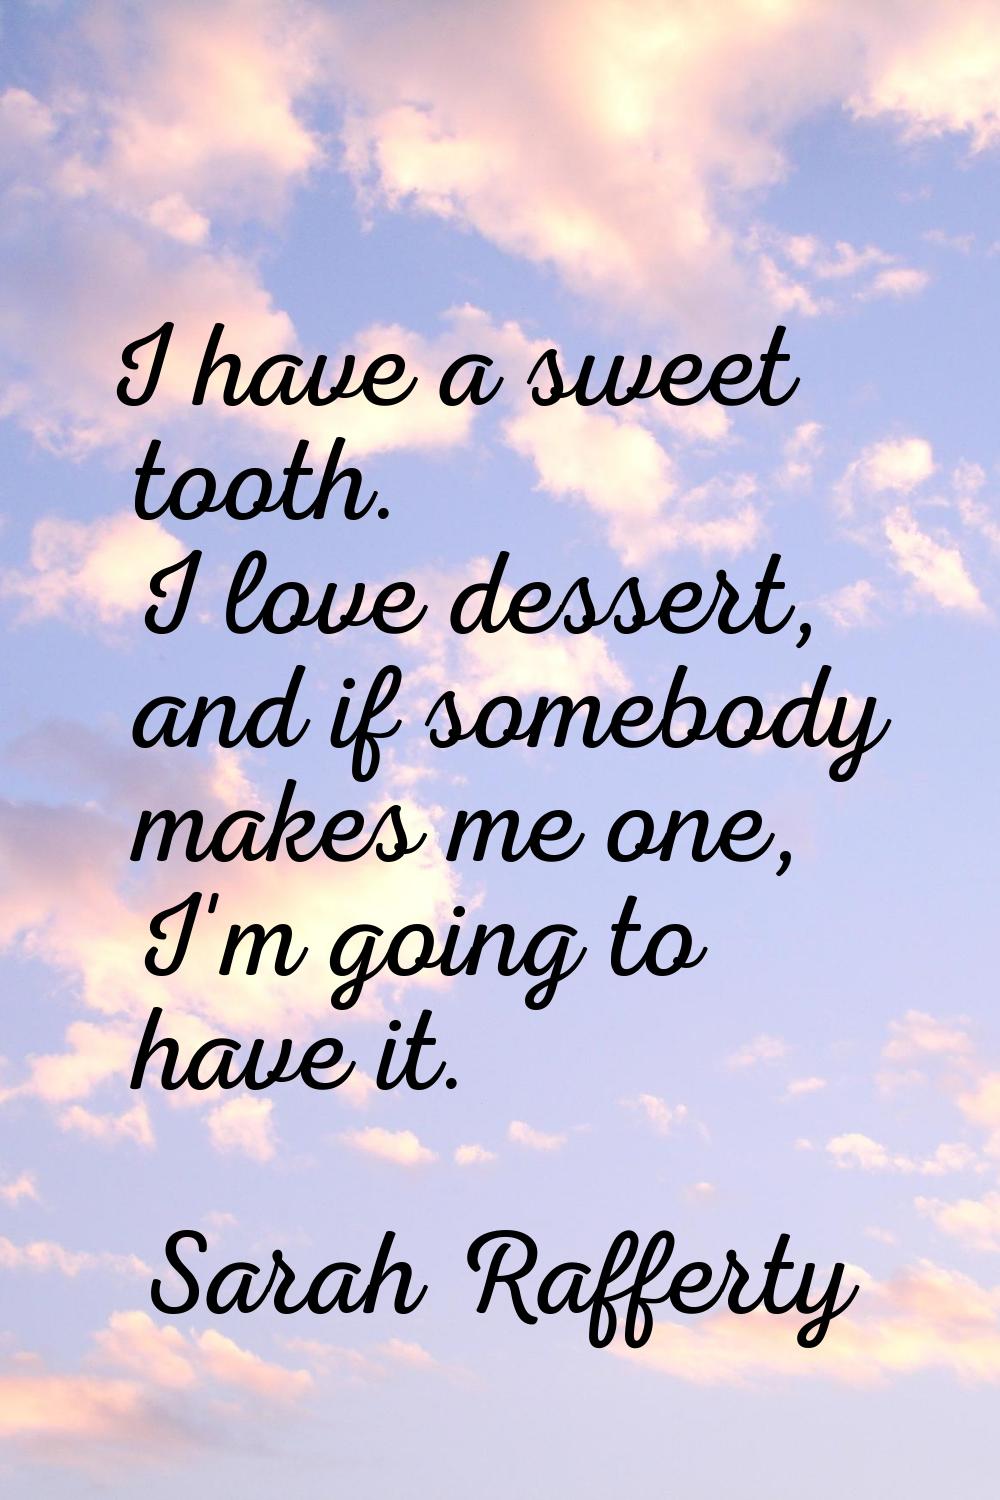 I have a sweet tooth. I love dessert, and if somebody makes me one, I'm going to have it.